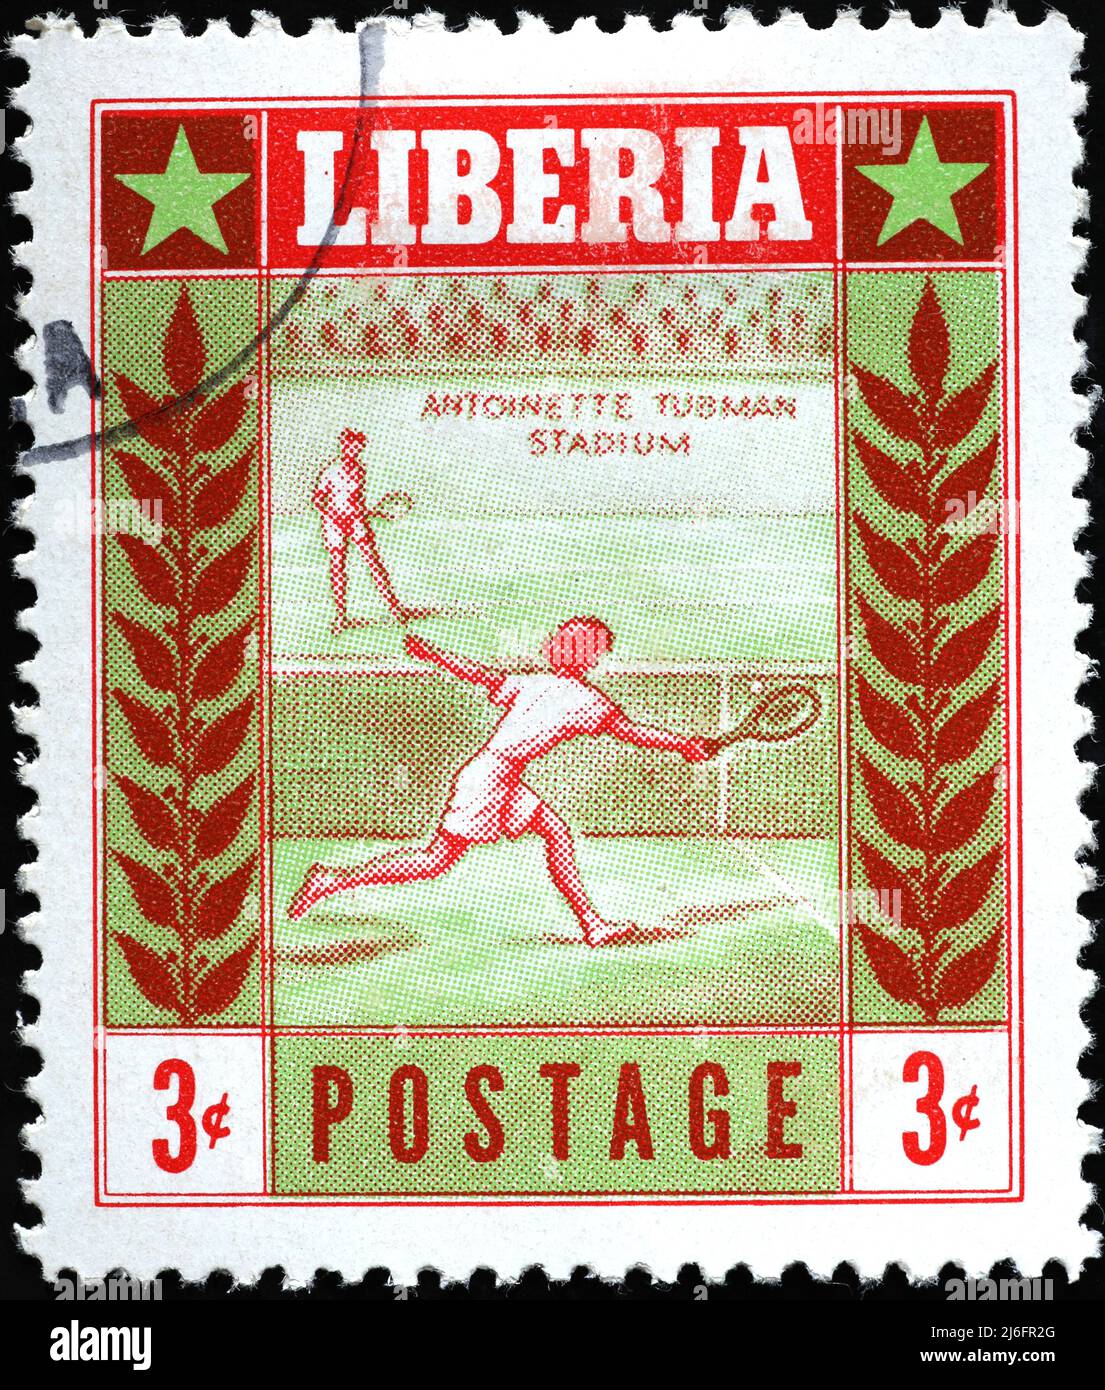 Tennis player on vintage stamp from Liberia Stock Photo